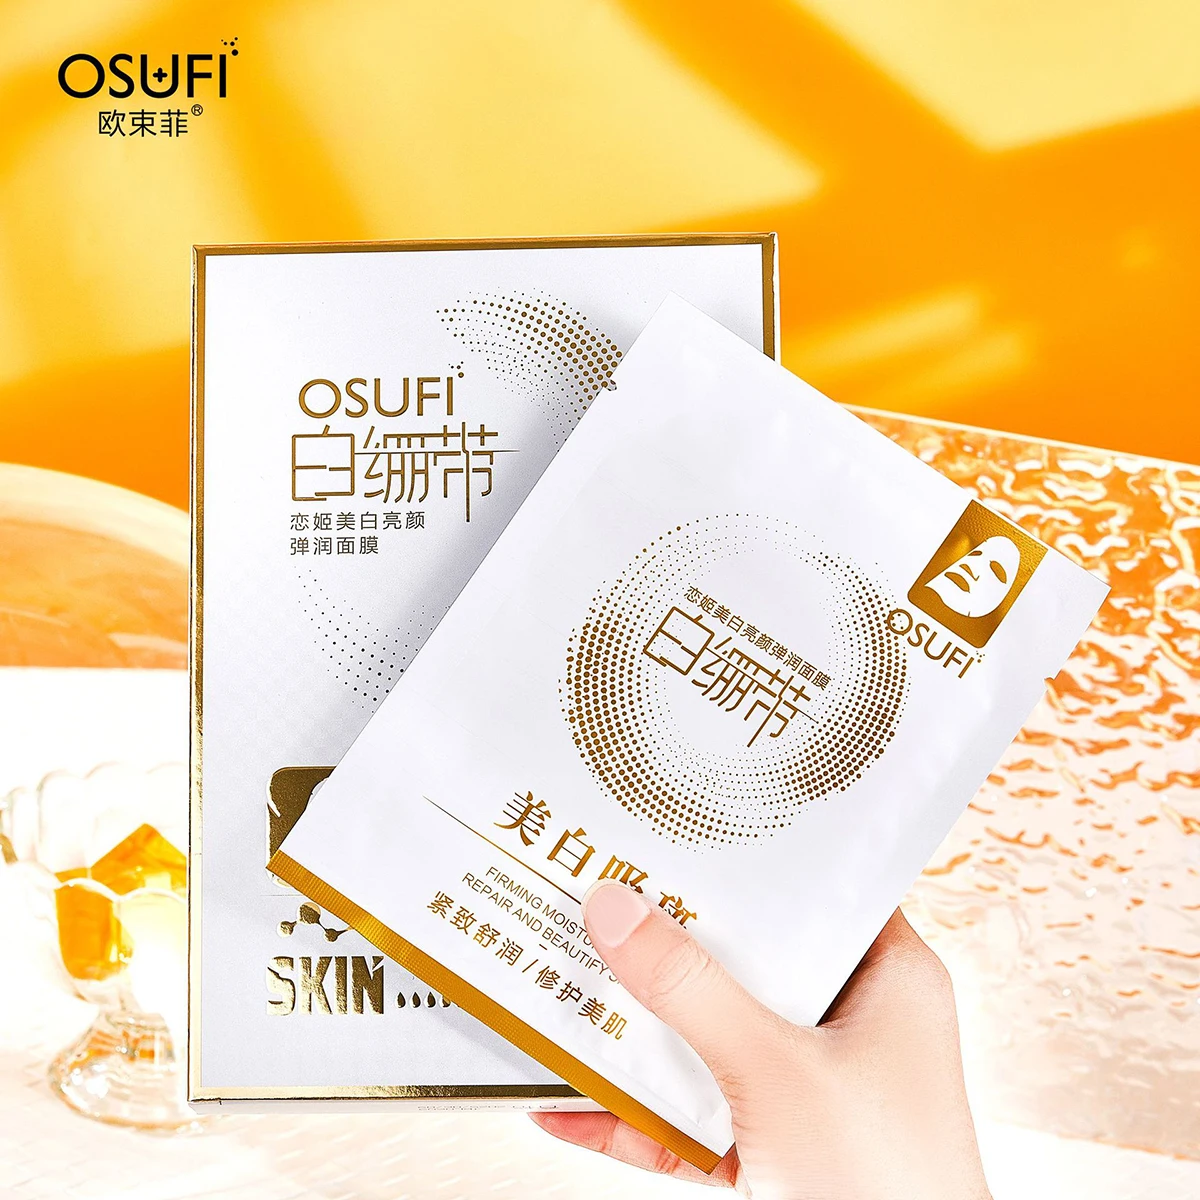 OSUFI Whitening Facial Mask Firming Soothing Repair Beauty Skin Remove Dark Spot Facial Care Face Mask Korea Skincare Products kefumei facial mask 165g ice cream applicator mud mask hydrating moisturizing repairing soothing face care skincare rare beauty